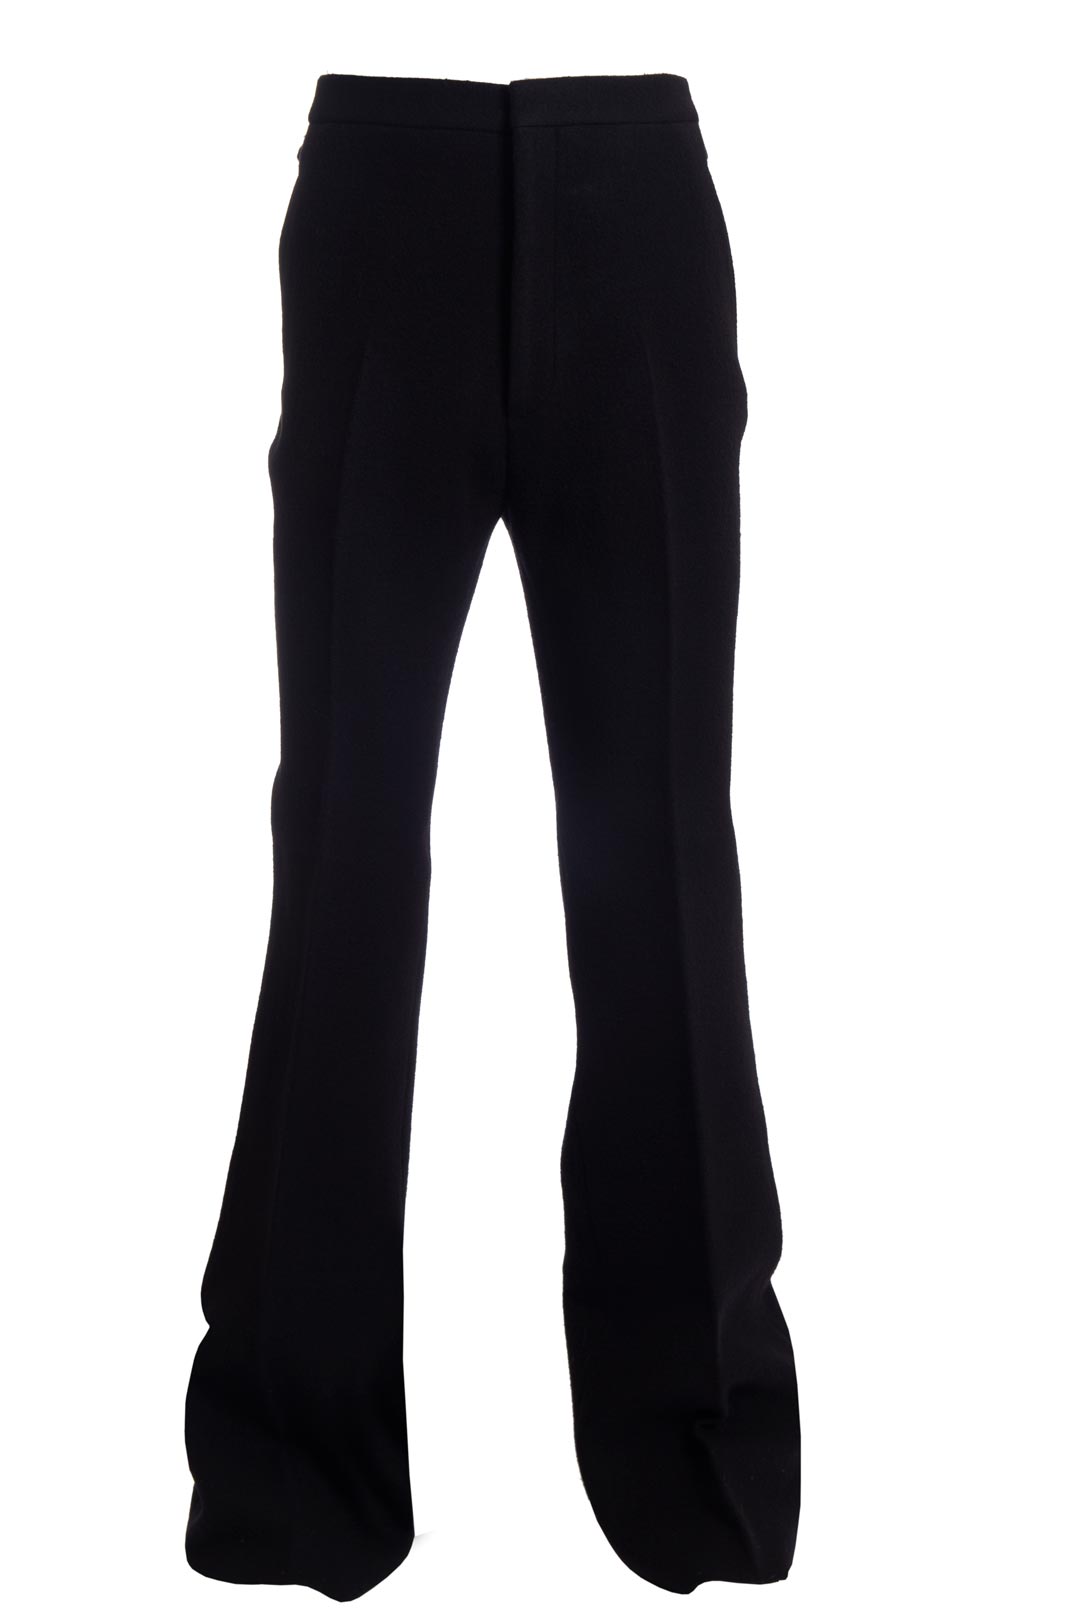 Lanvin Mens Large Flare Trousers in Midnight (Blue) for Men - Lyst